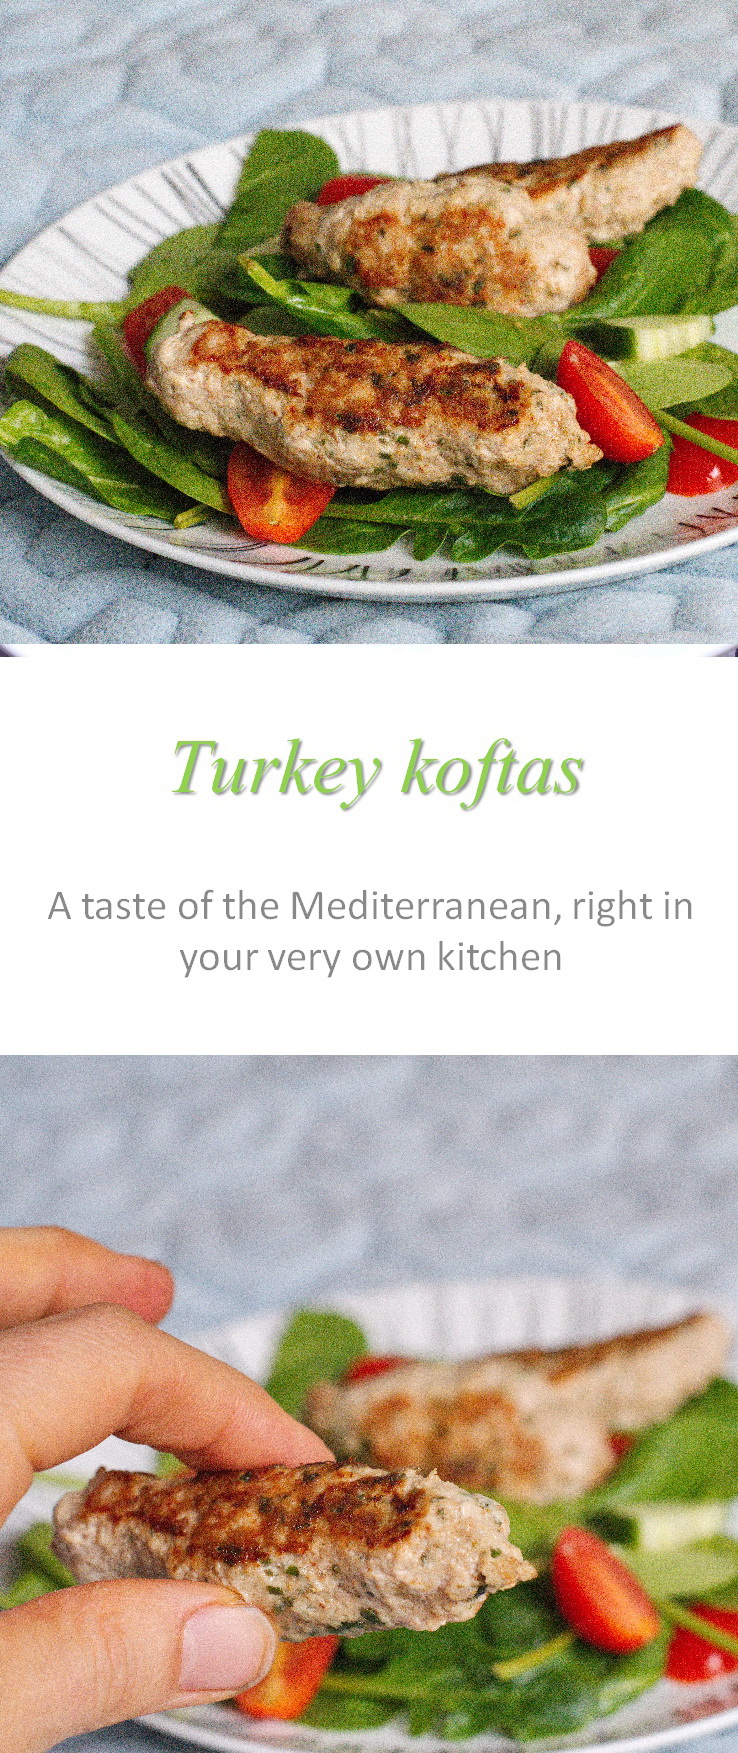 A great Middle Eastern option for an easy weeknight dinner, these turkey koftas have great flavor and so easy to make. #koftas